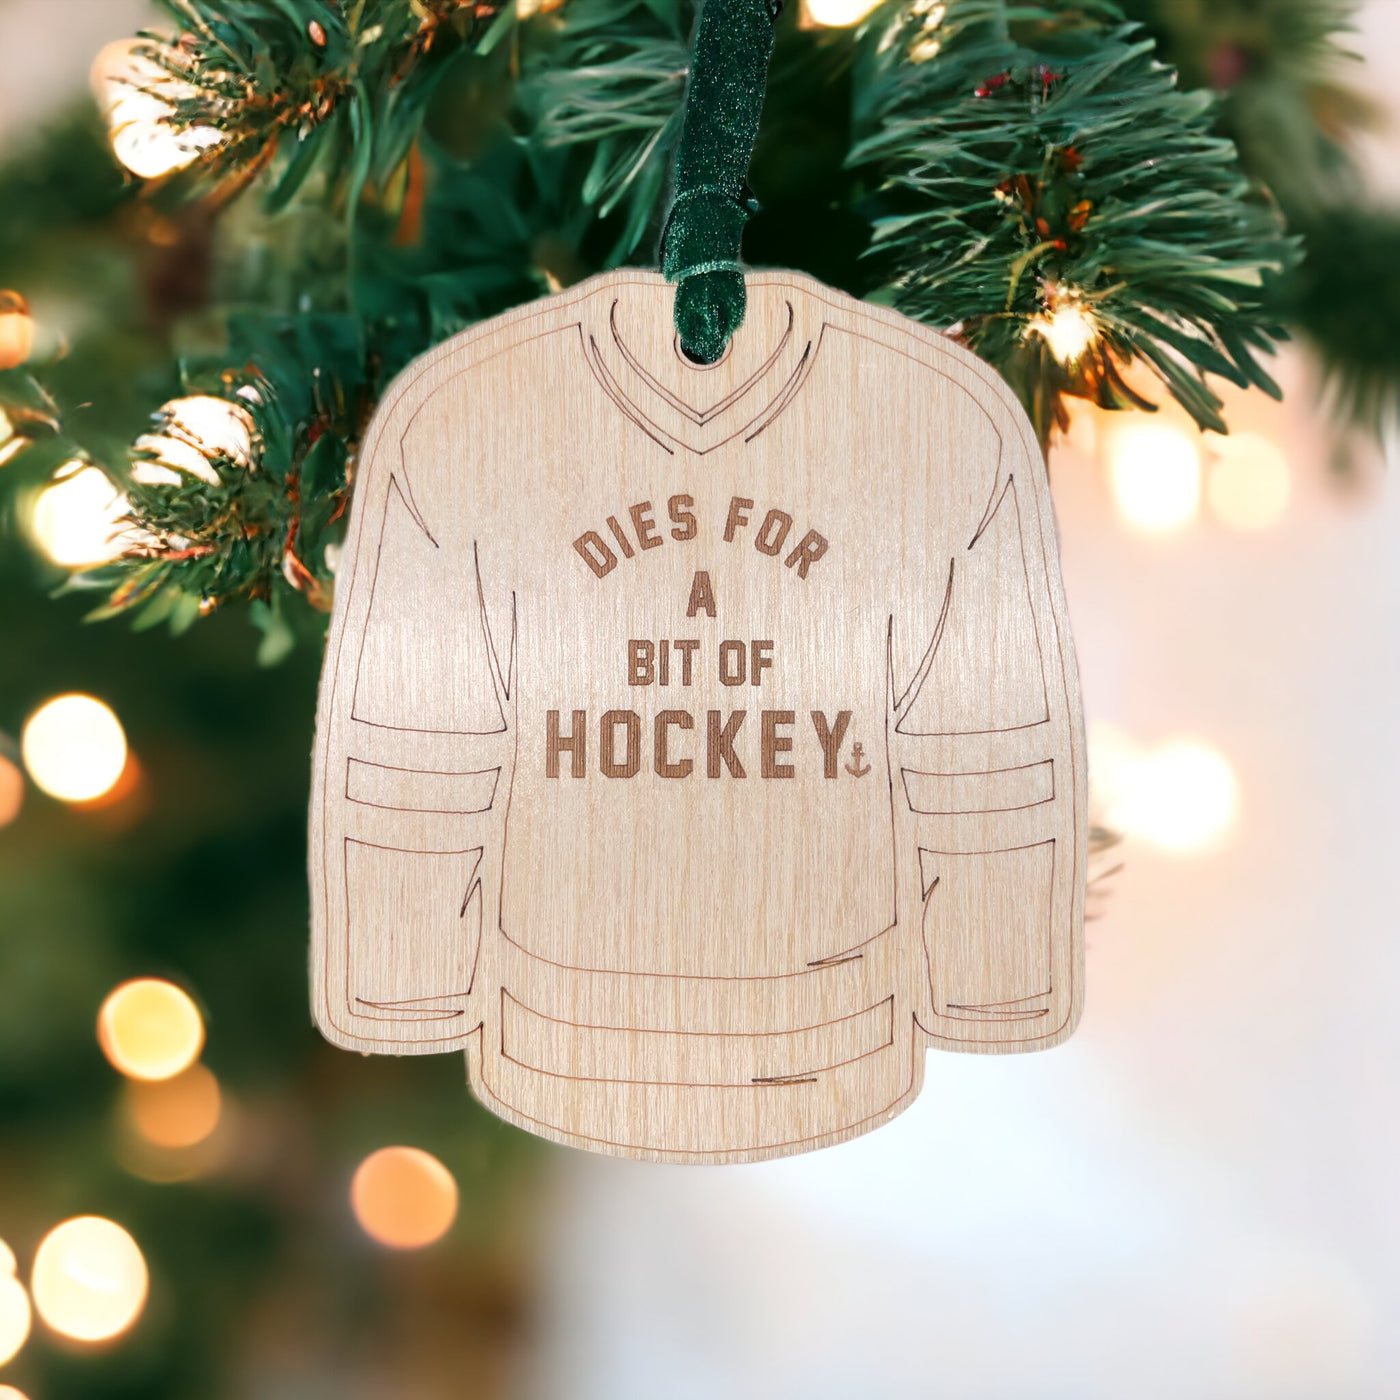 "Dies For A Bit of Hockey" Wooden Ornament